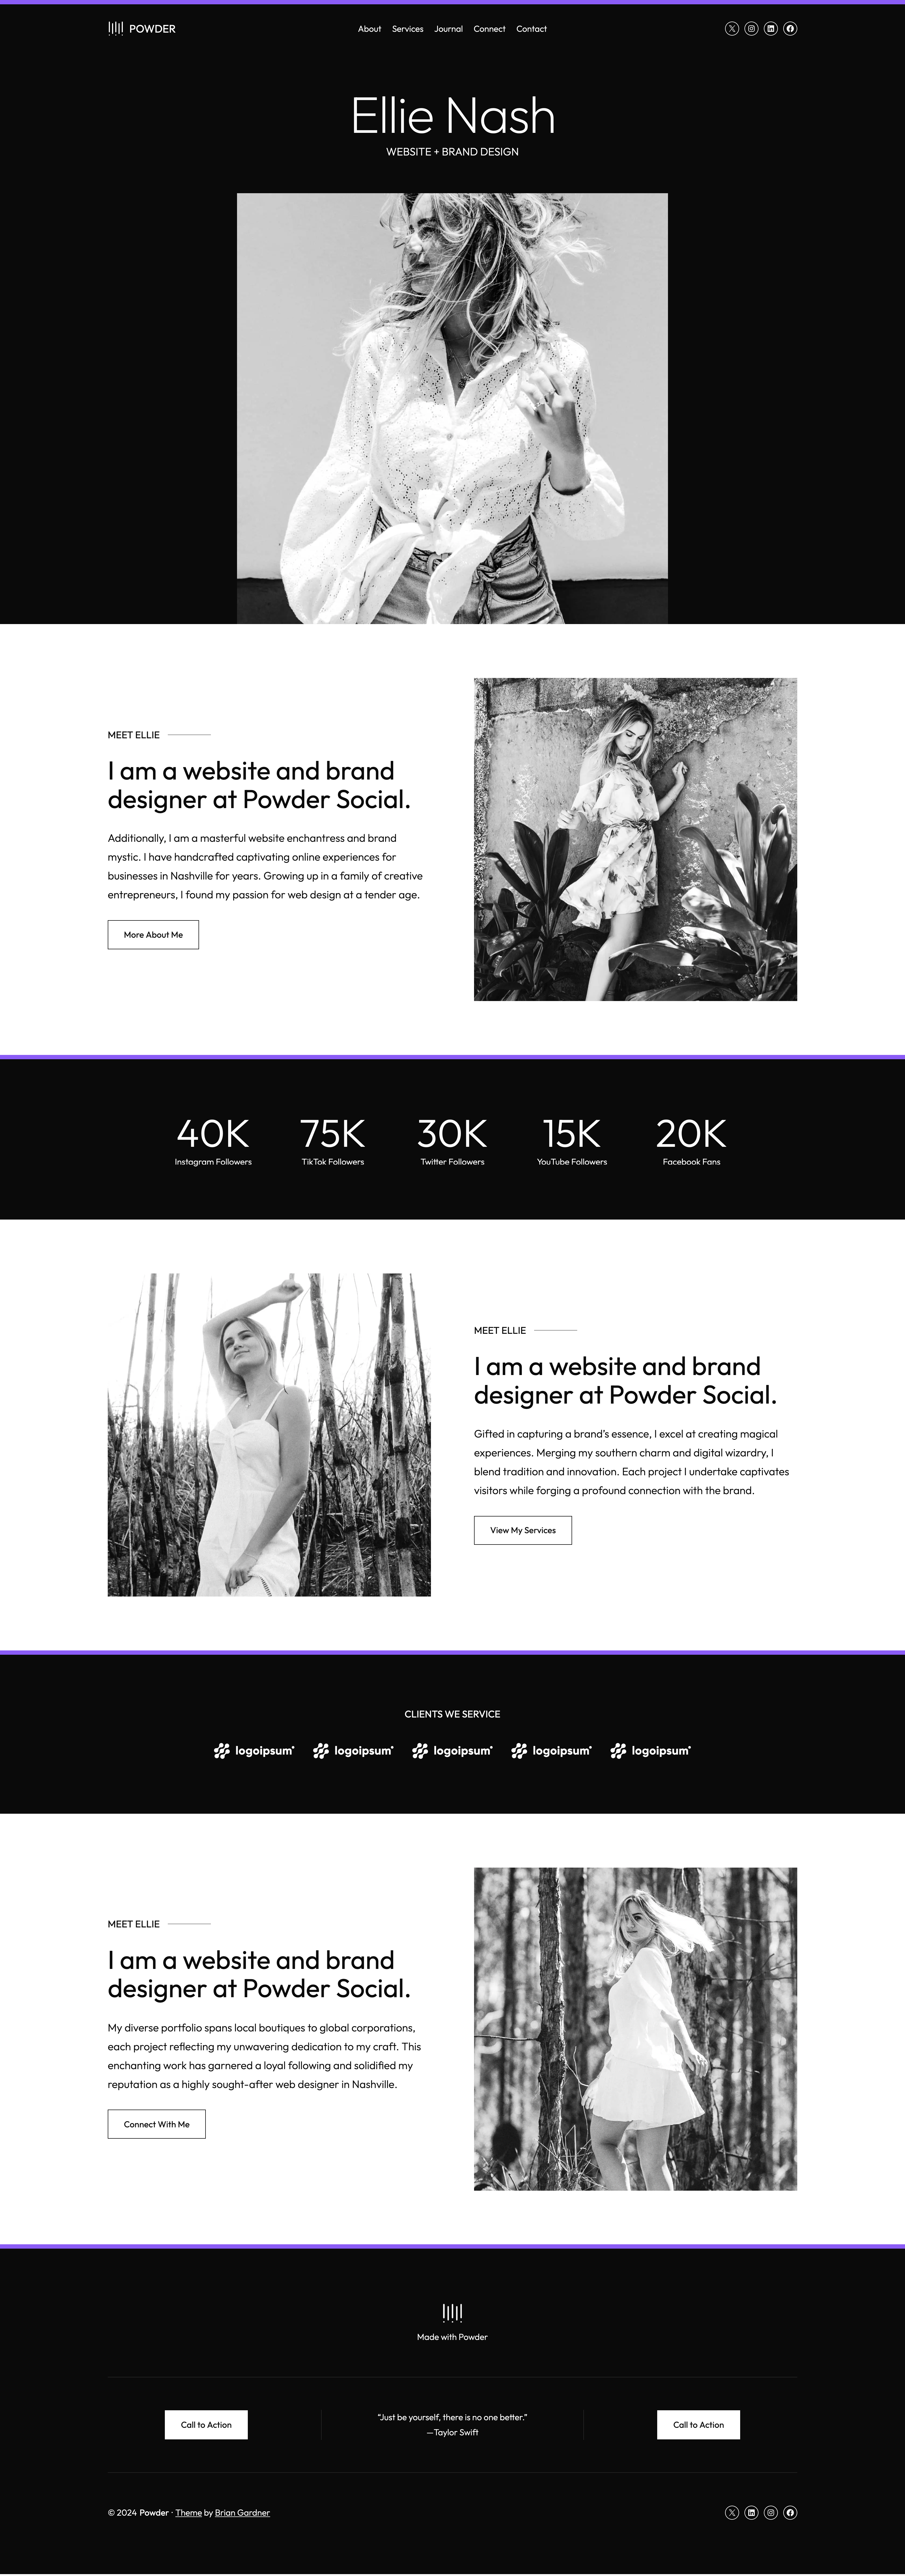 The home page of the Powder Social child theme.